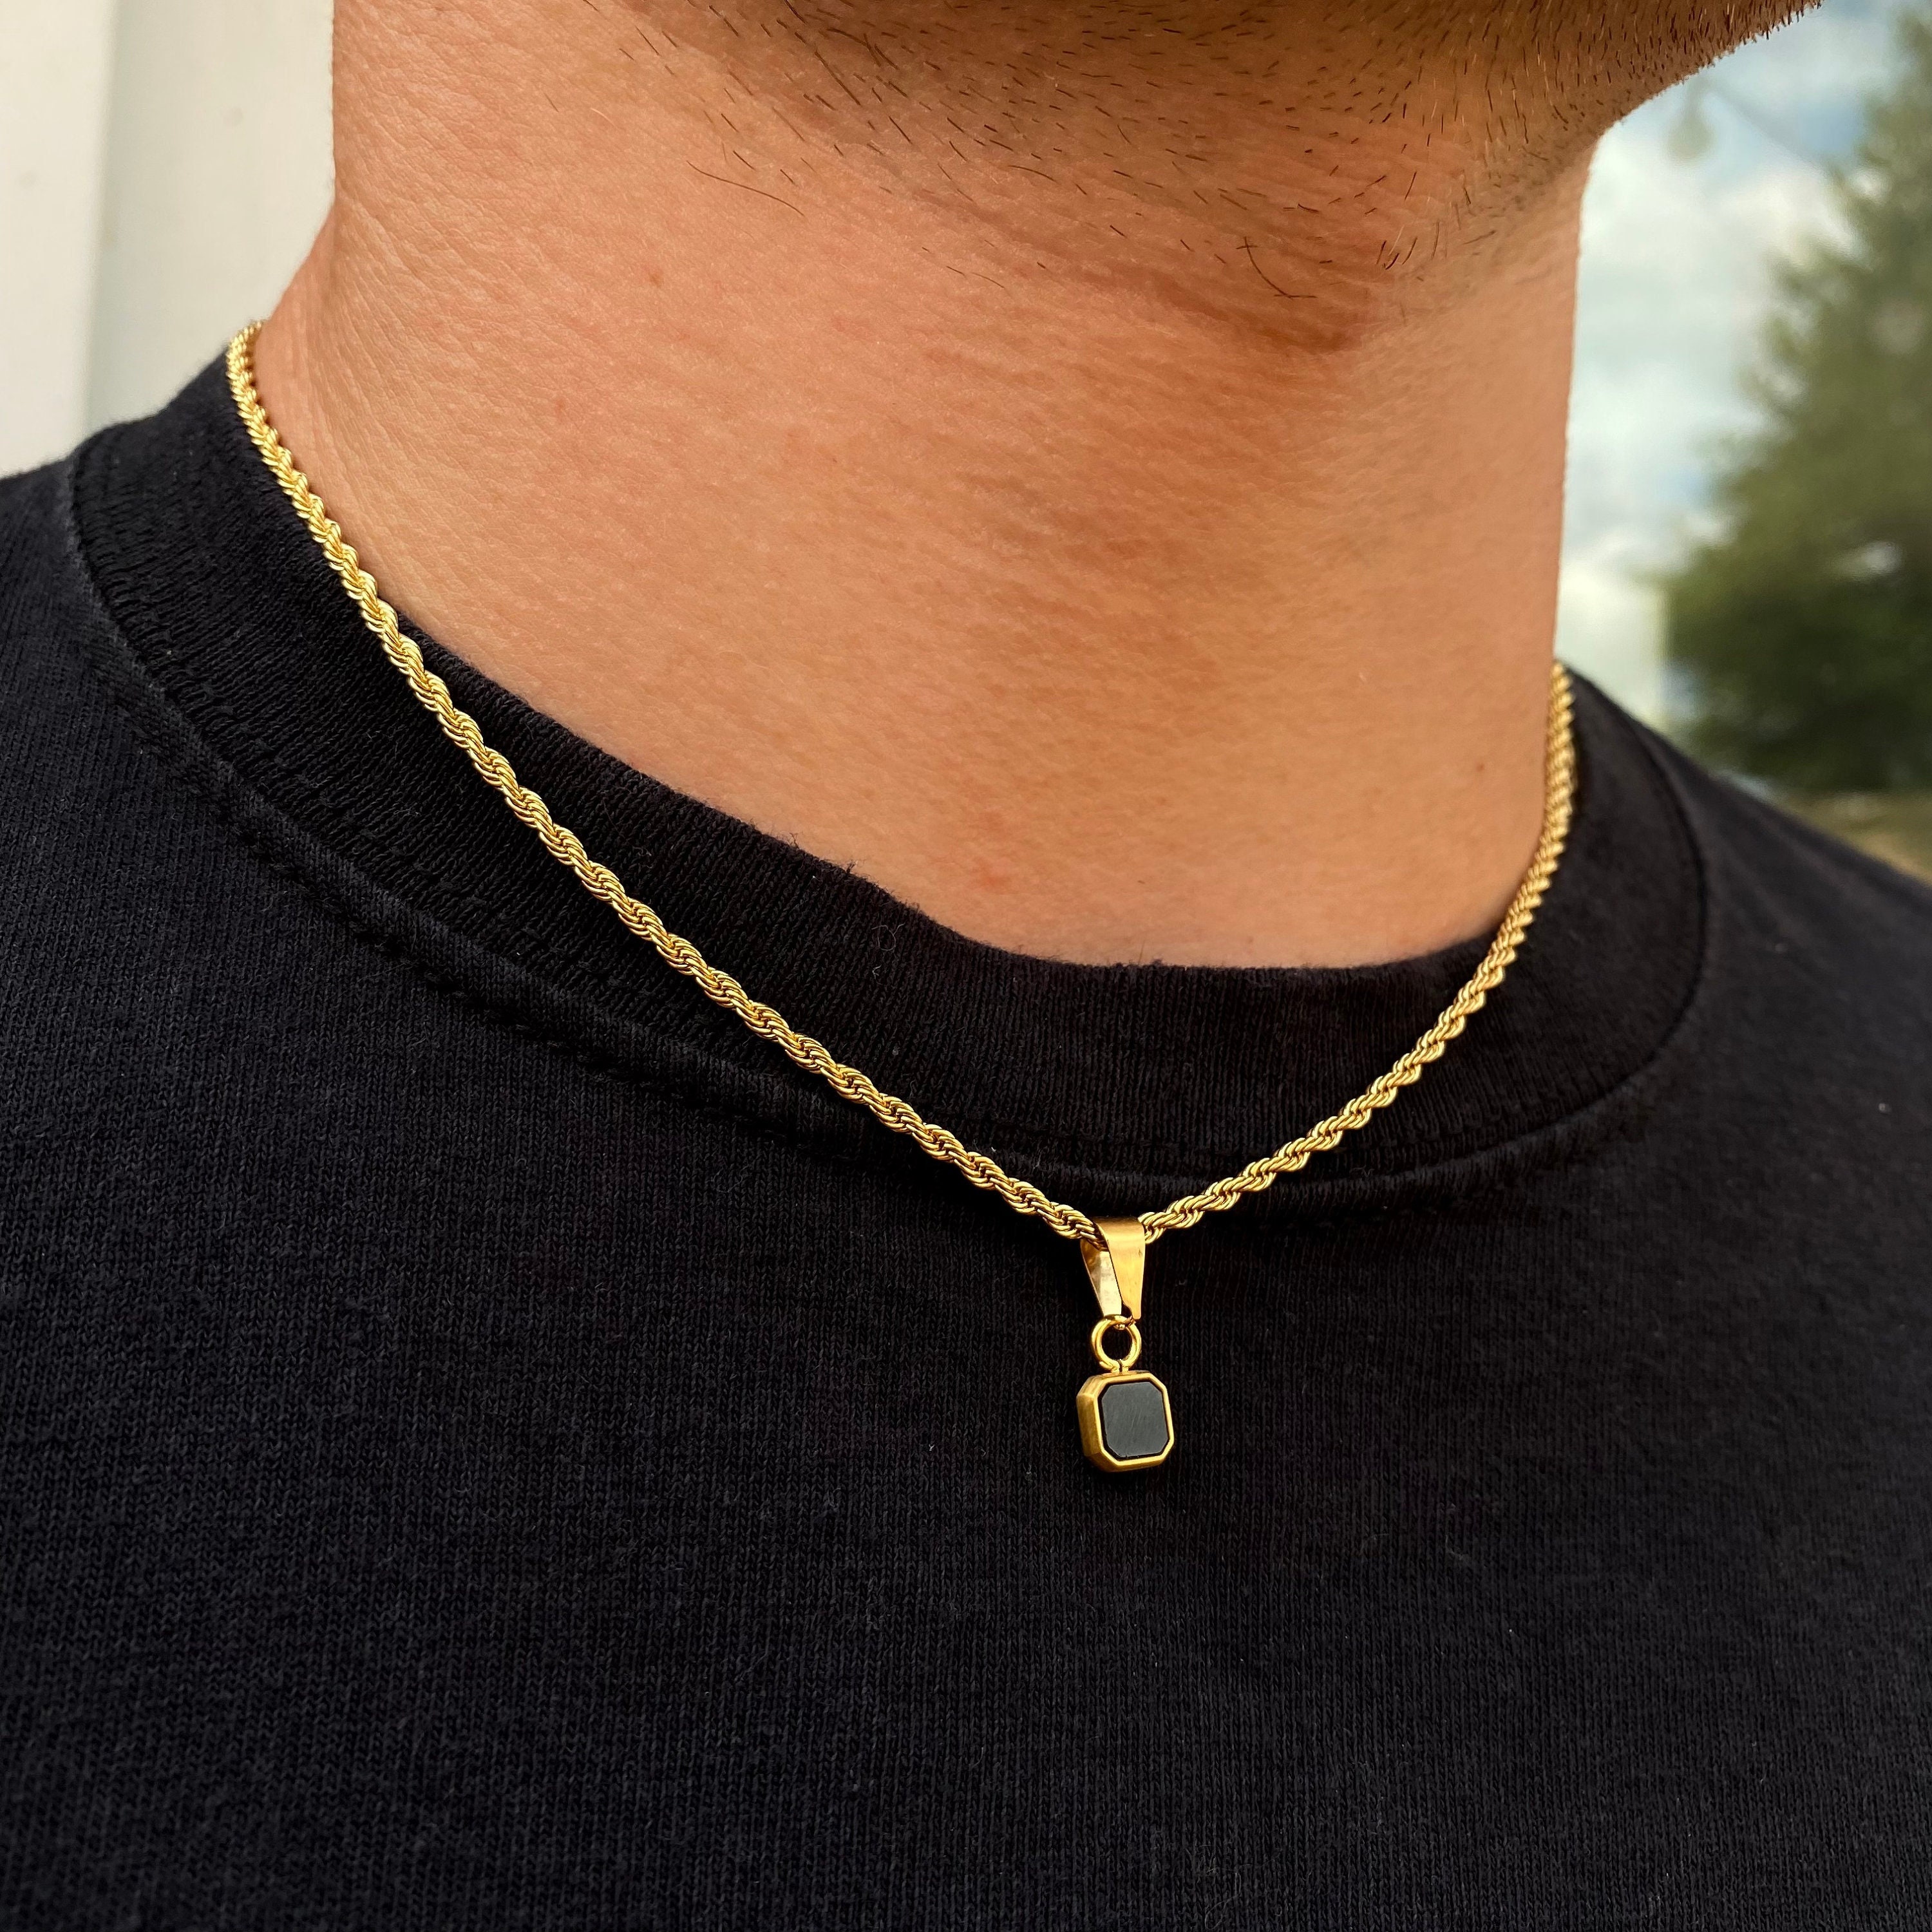 Firefighter Pendant - 14K Gold Necklace Crafted For Men